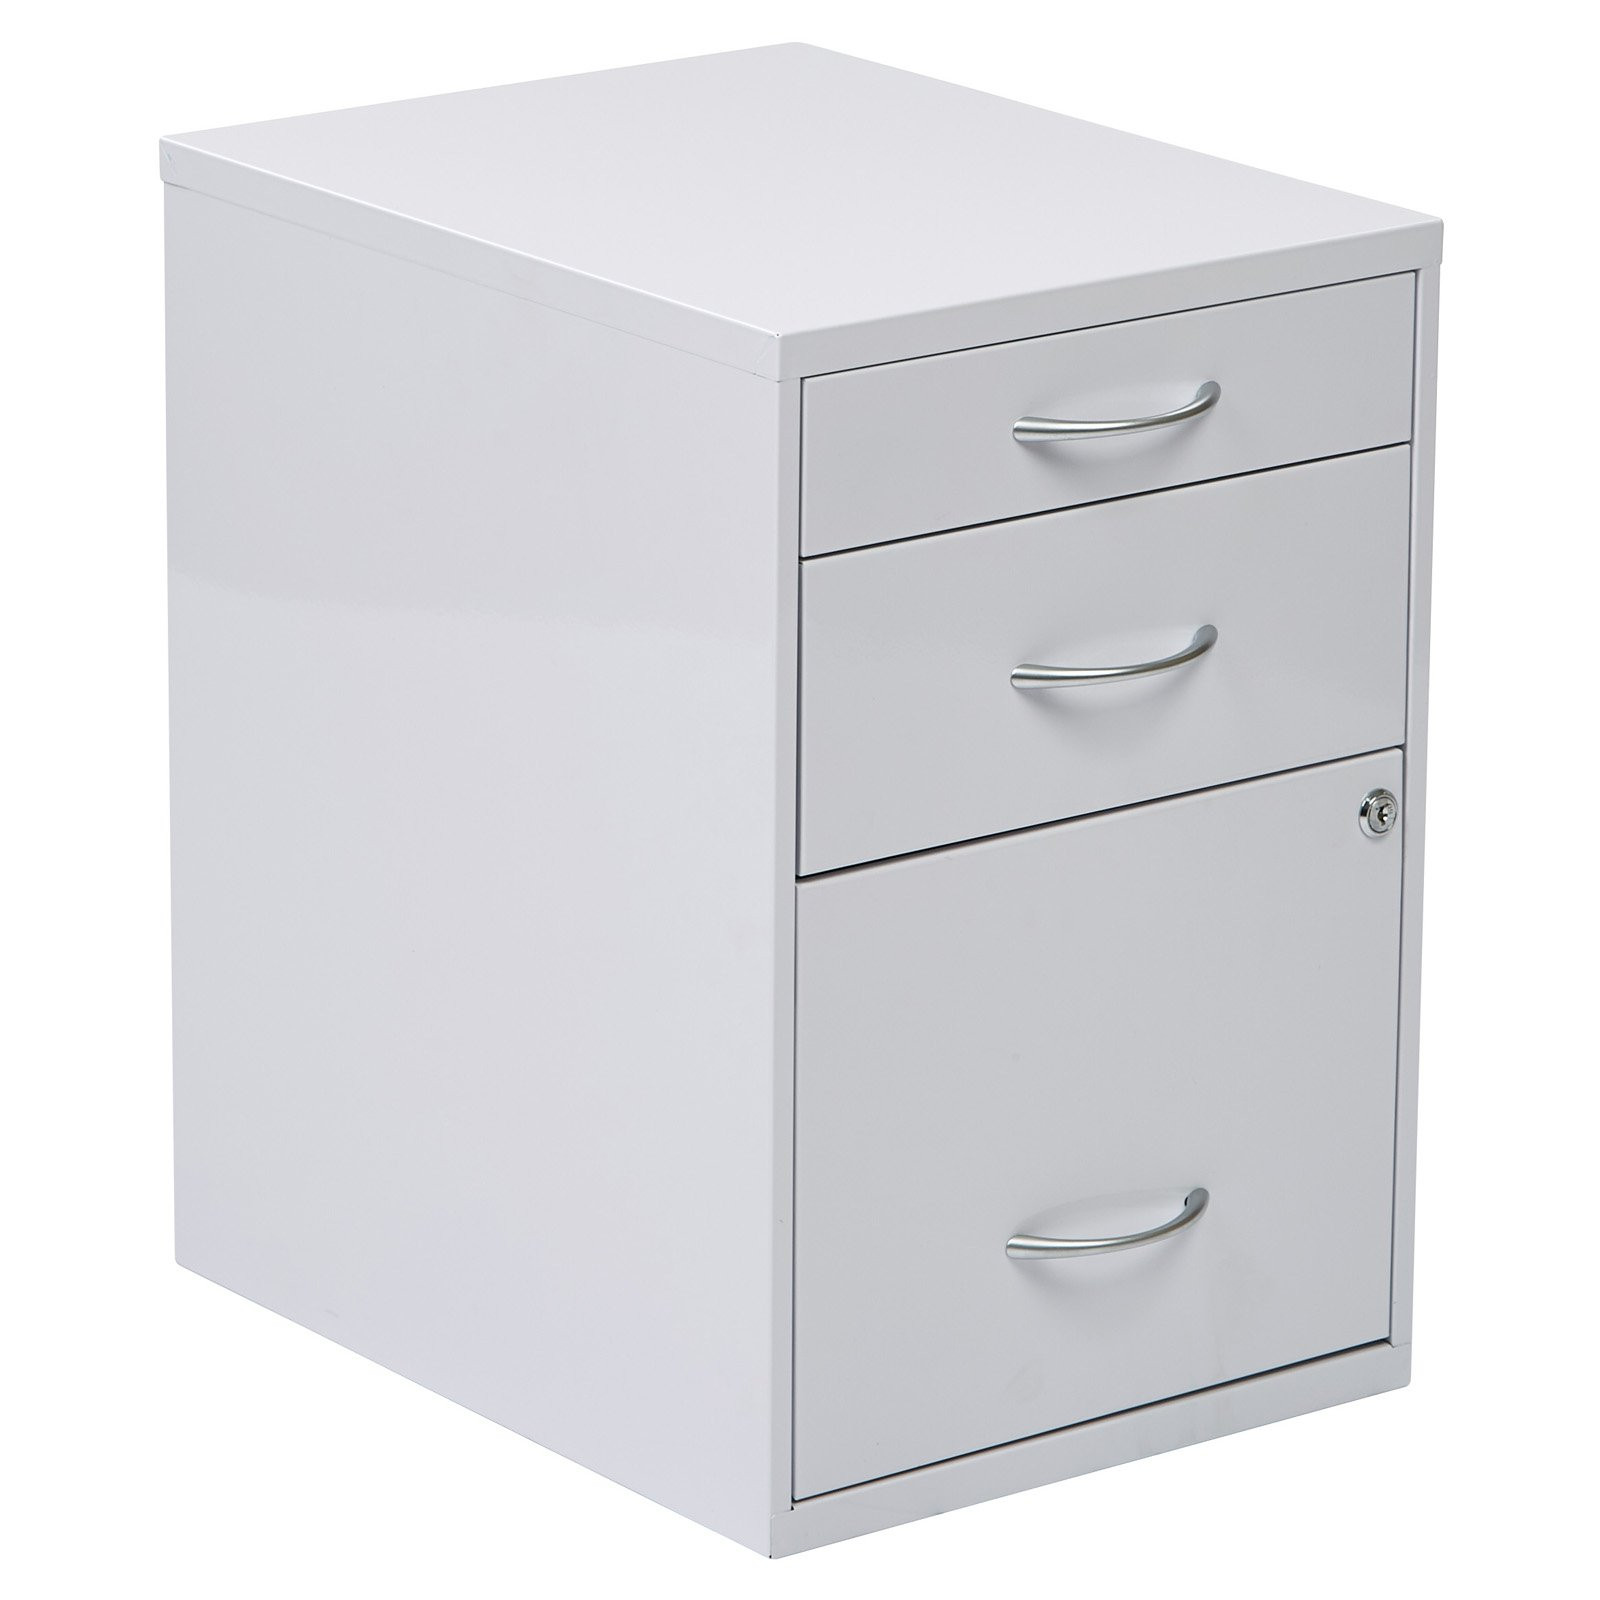 Osp Designs 3 Drawer Vertical Metal Lockable Filing Cabinet White with dimensions 1600 X 1600